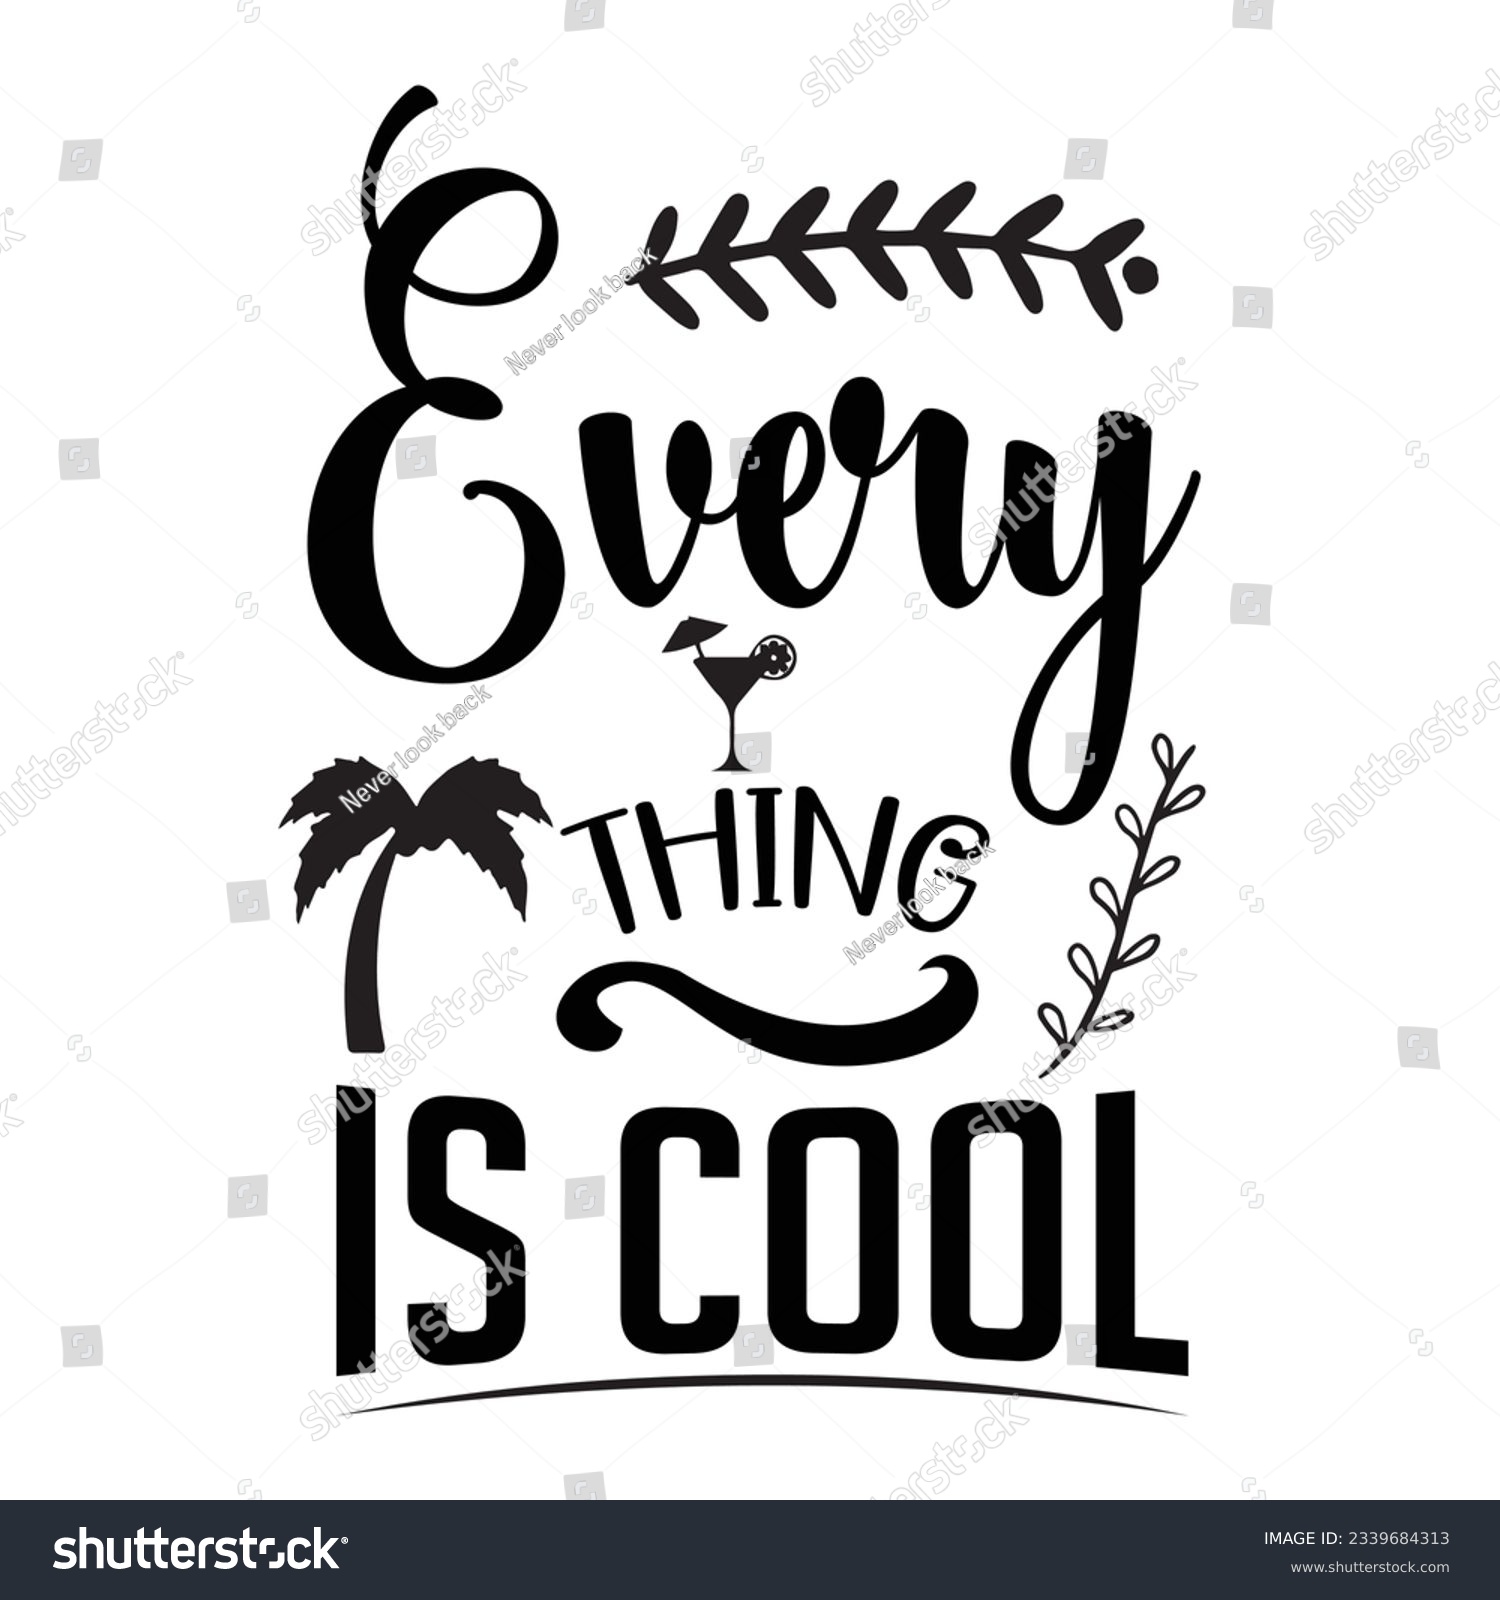 SVG of  every thing is cool SVG t-shirt design, summer SVG, summer quotes , waves SVG, beach, summer time  SVG, Hand drawn vintage illustration with lettering and decoration elements svg